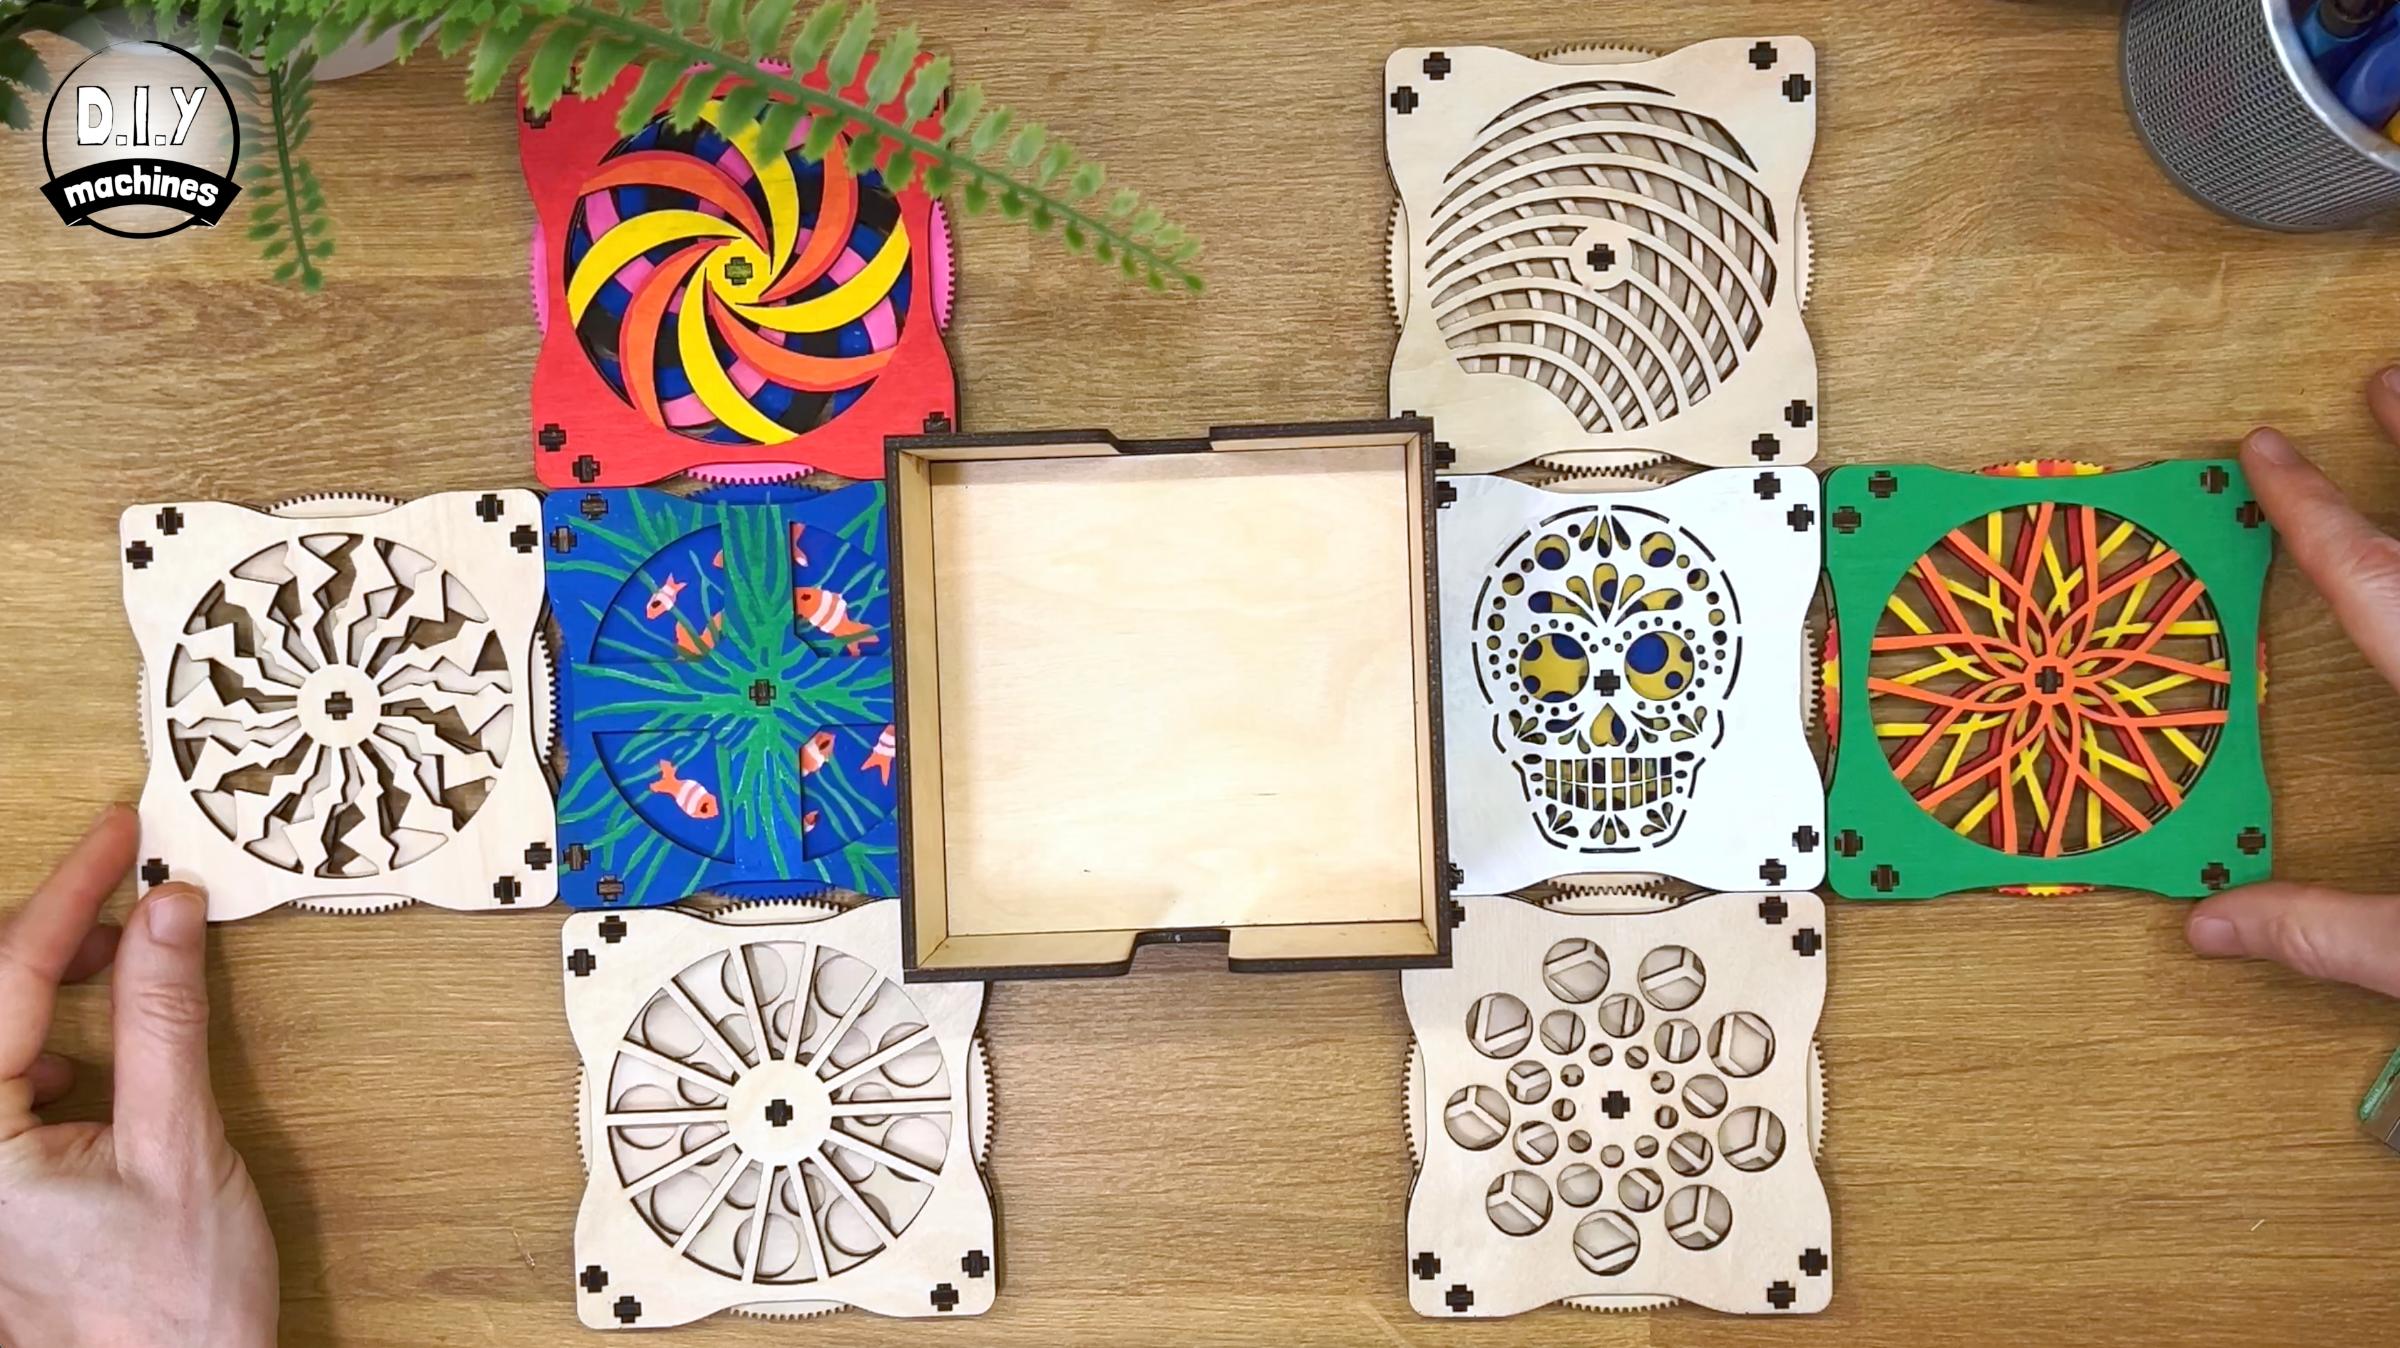 KINETIC COASTERS with a TWIST! Laser or 3D Print some DIY Magic 3d model